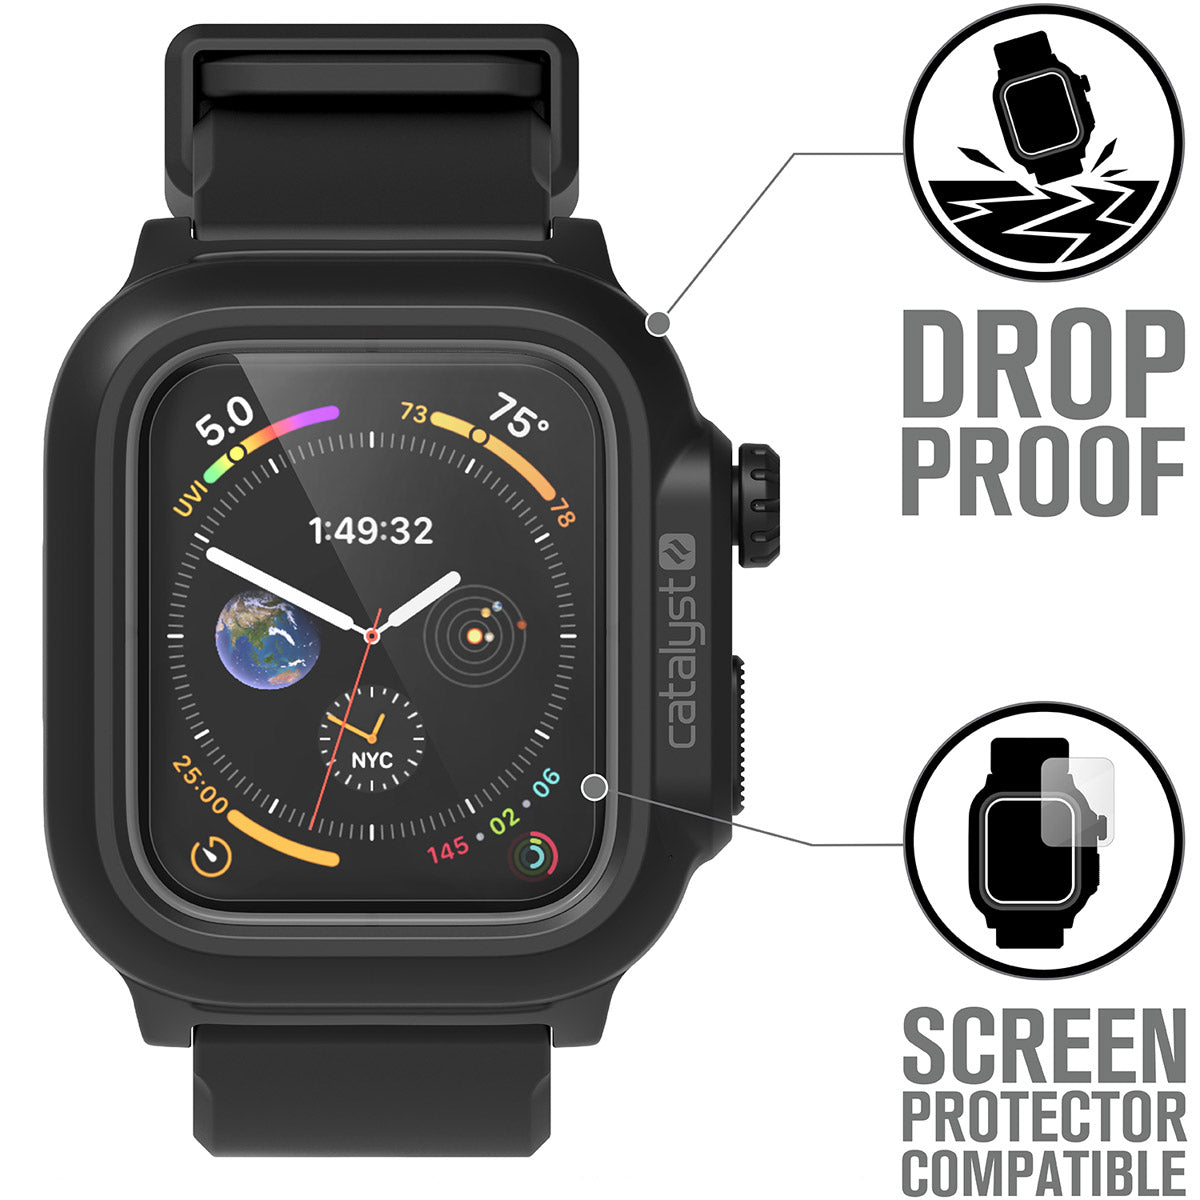 catalyst apple watch series 6 5 4 se gen 2 1 40mm 44mm waterproof case band stealth black showing the screen protector compatibility text reads drop proof screen protector compatible